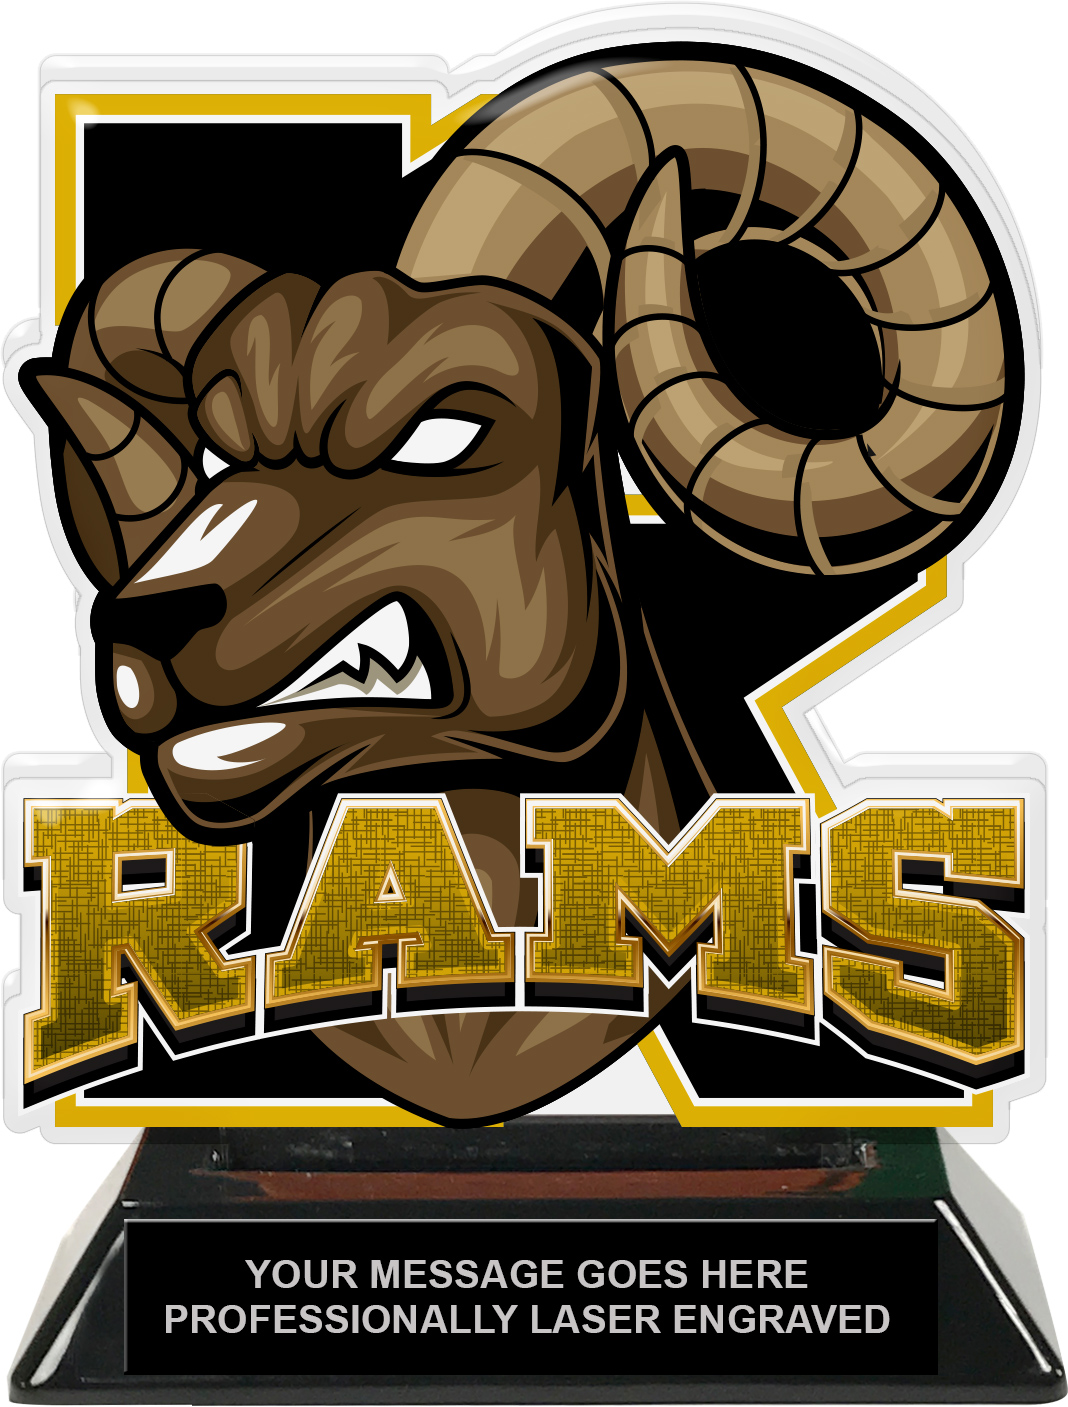 Rams Mascot Colorix-T Acrylic Trophy - 6.25 inch Gold